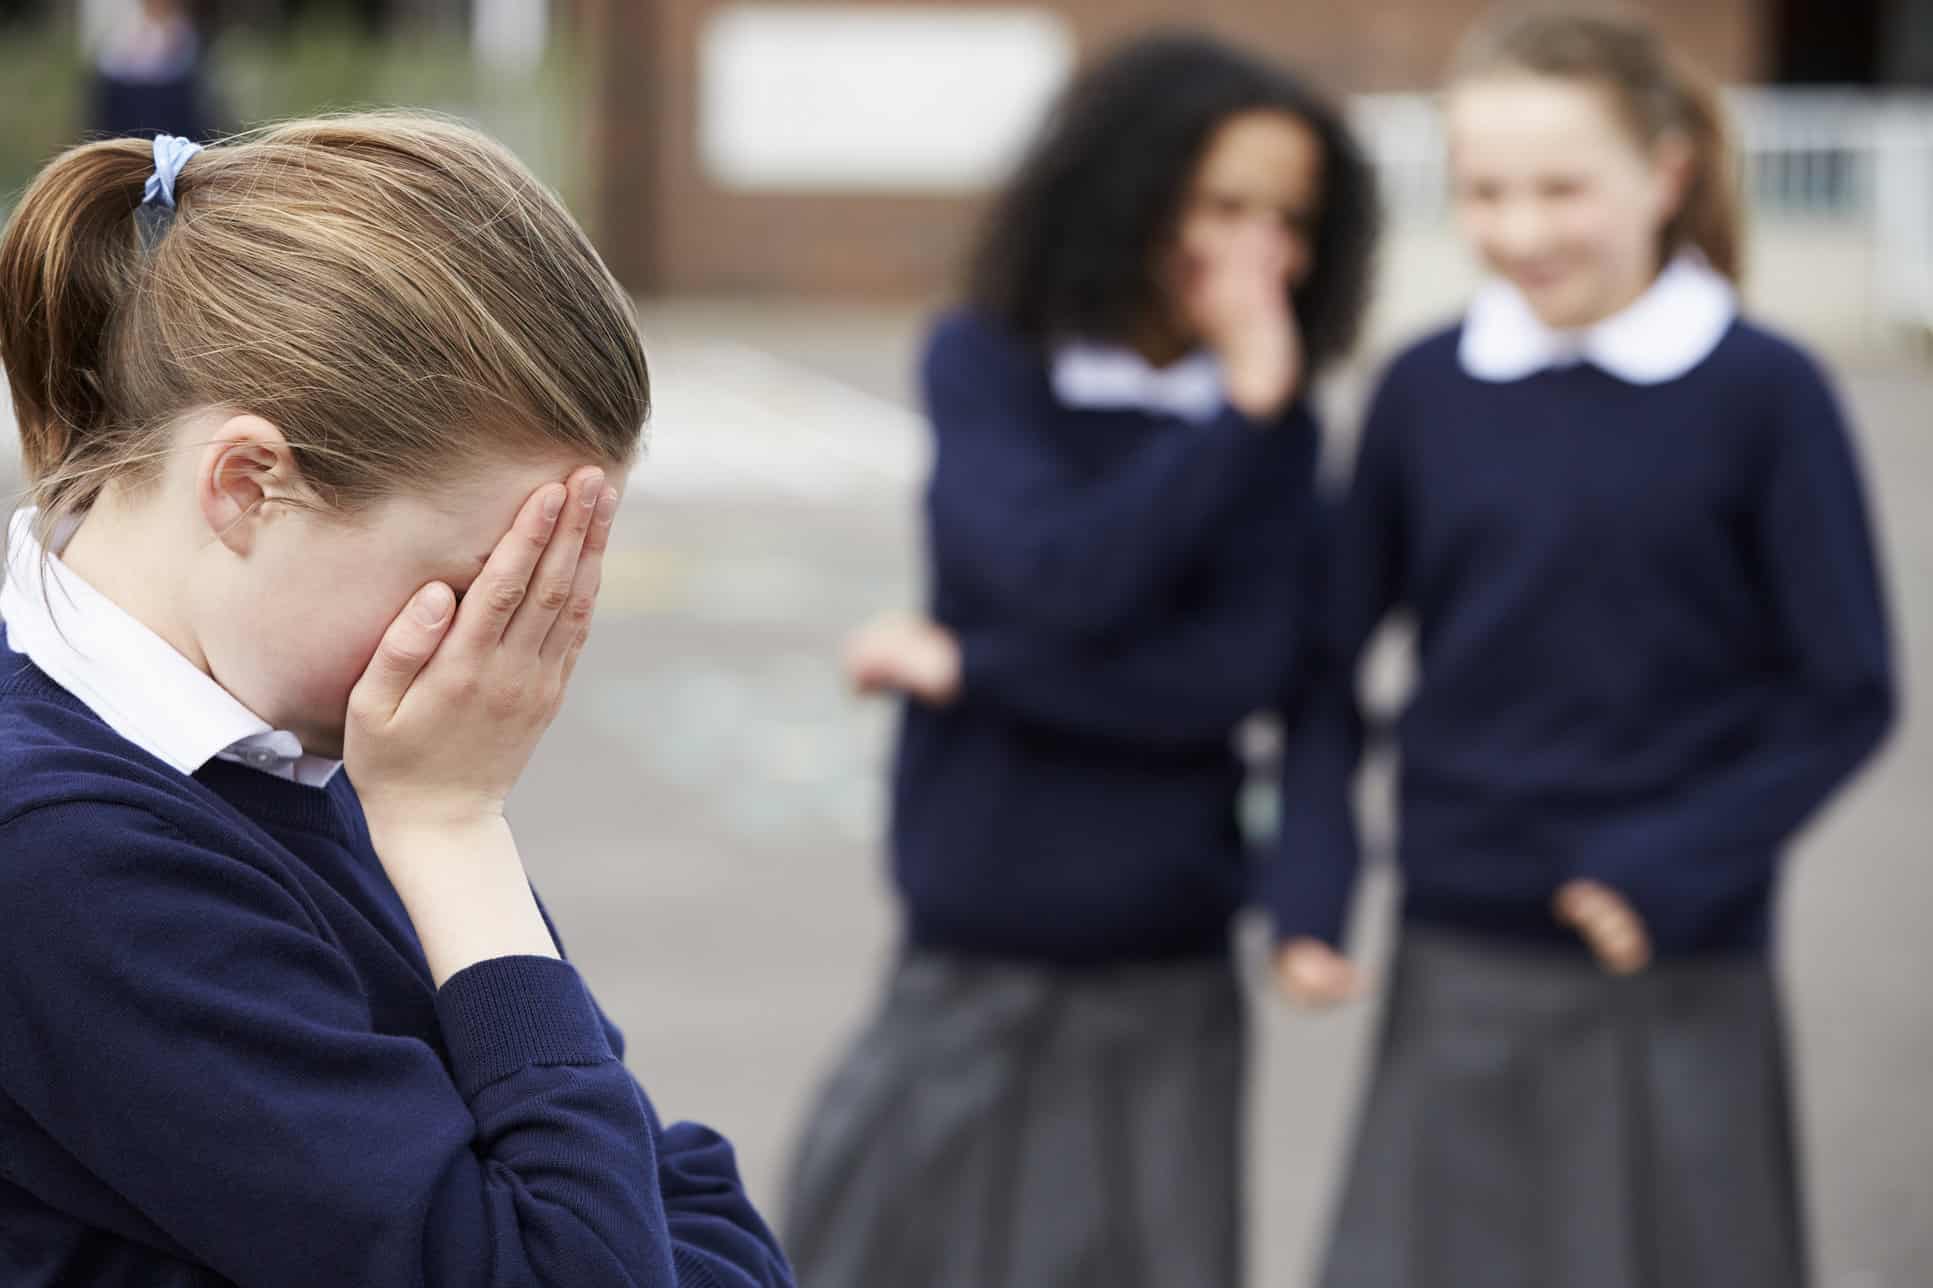 A New Study Discovered That Who Gets Bullied At School?